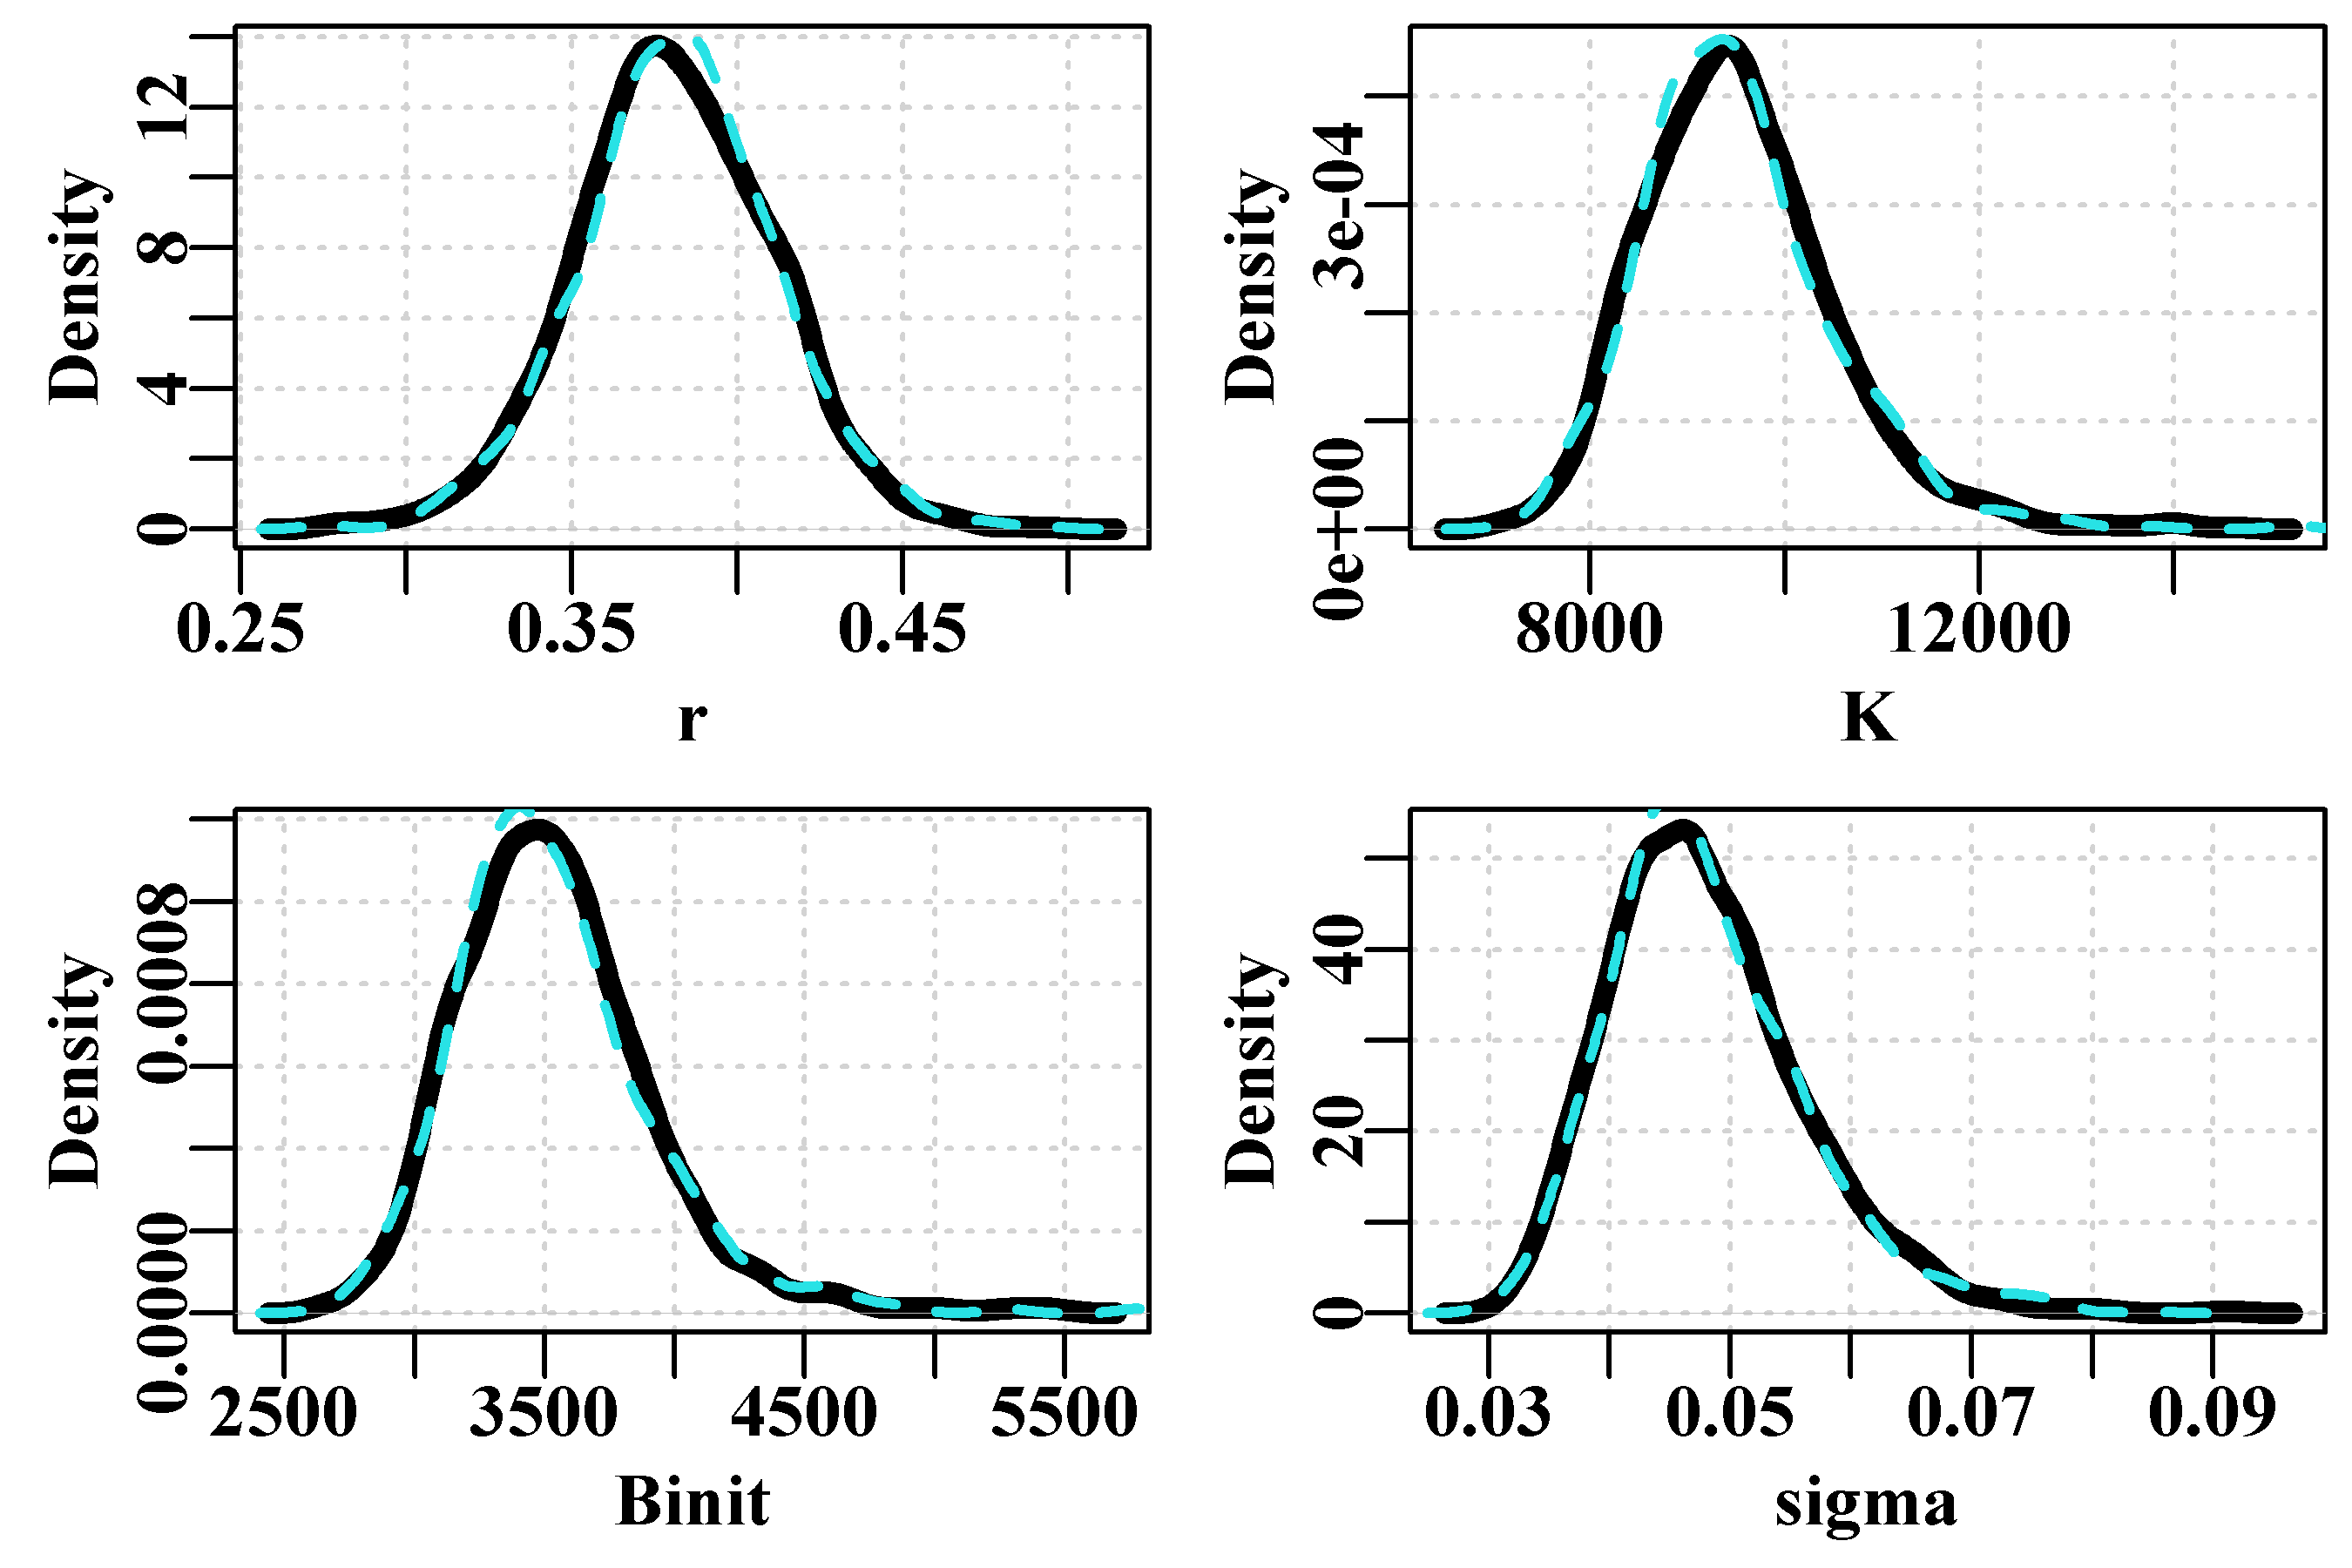 The variation between two chains in the marginal density distributions for the K parameter using 1000 and 2000 replicates at thinning rates of 2048 (dashed line) and 1024 (solid black line).